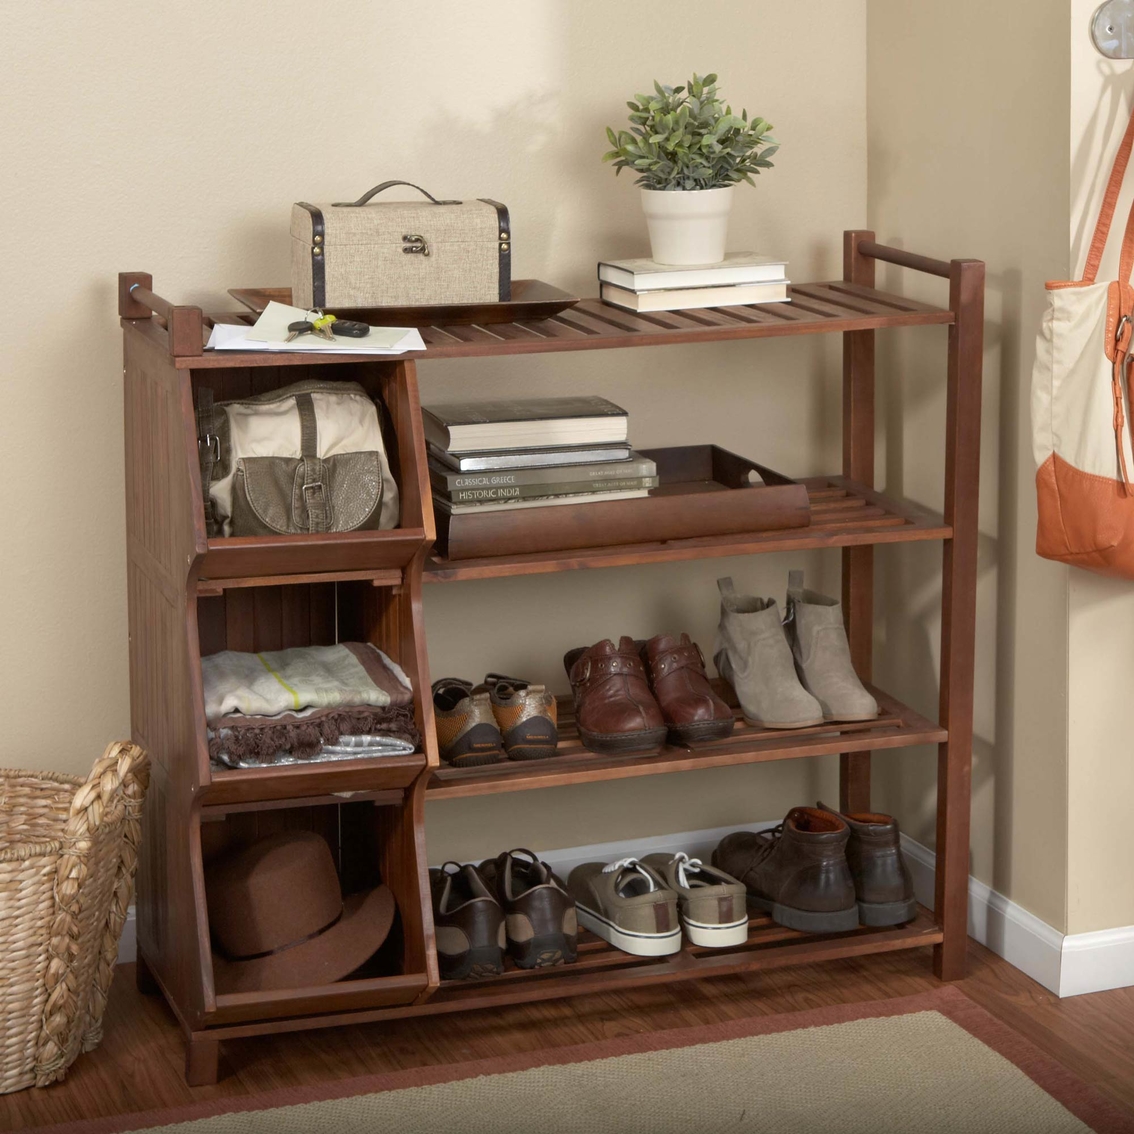 Northbeam Outdoor Shoe Rack and Cubby - Image 7 of 8